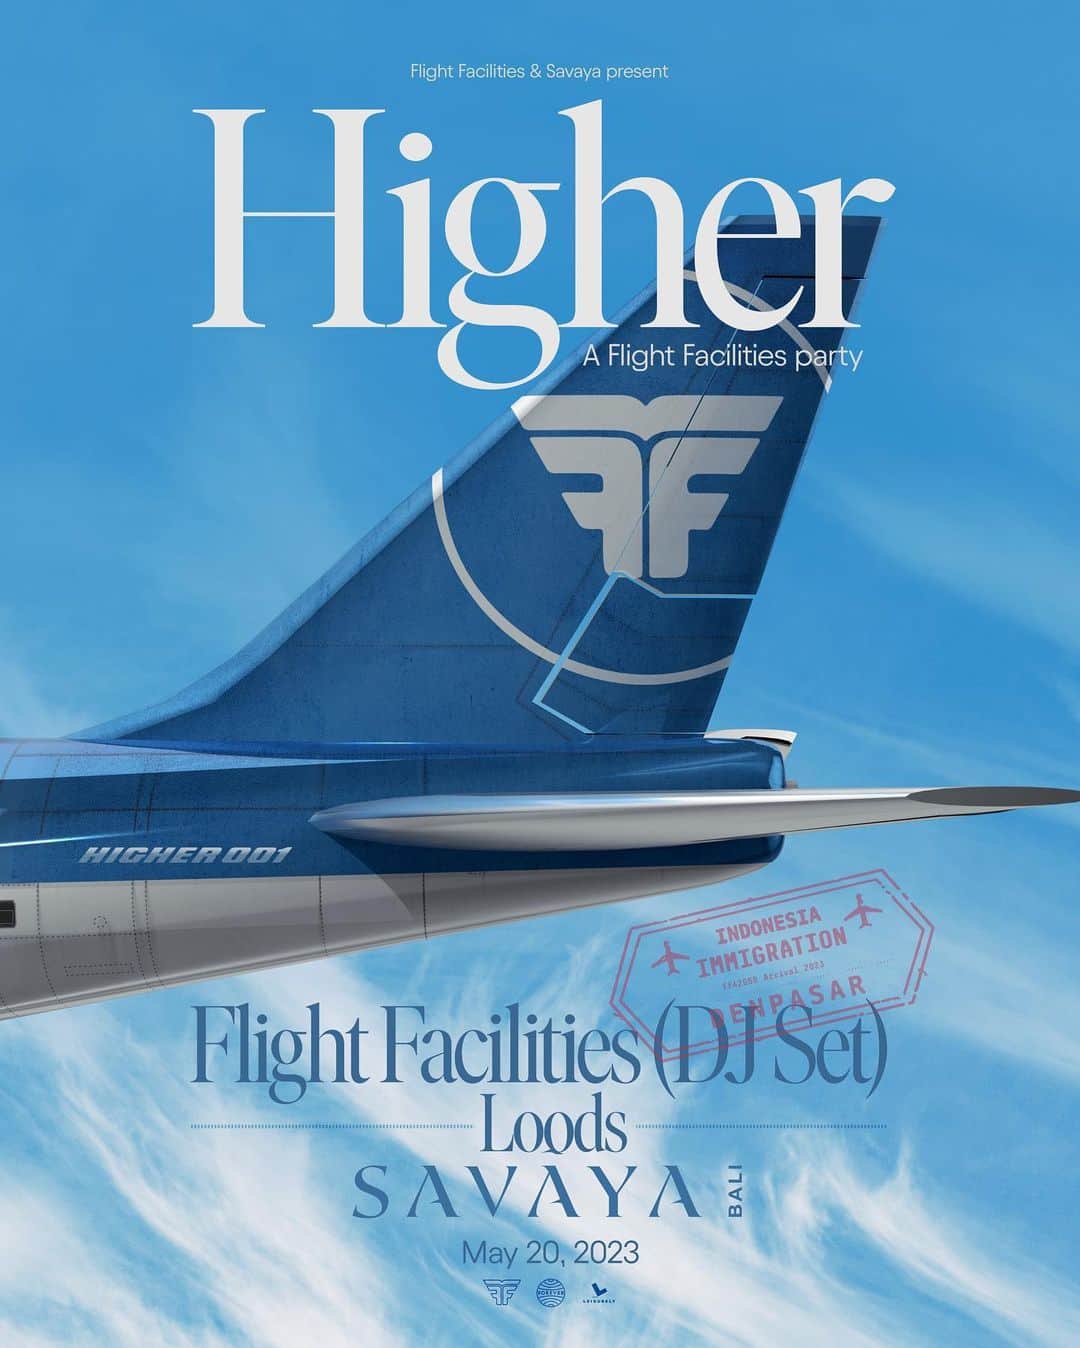 Flight Facilitiesのインスタグラム：「Higher.   A truly Flight Facilities party.   Come and see what we’ve been busy working on for you. Our first guest is the rising star @loods.jpg   Boarding commences Saturday, May 20th.   Only @savayabali」